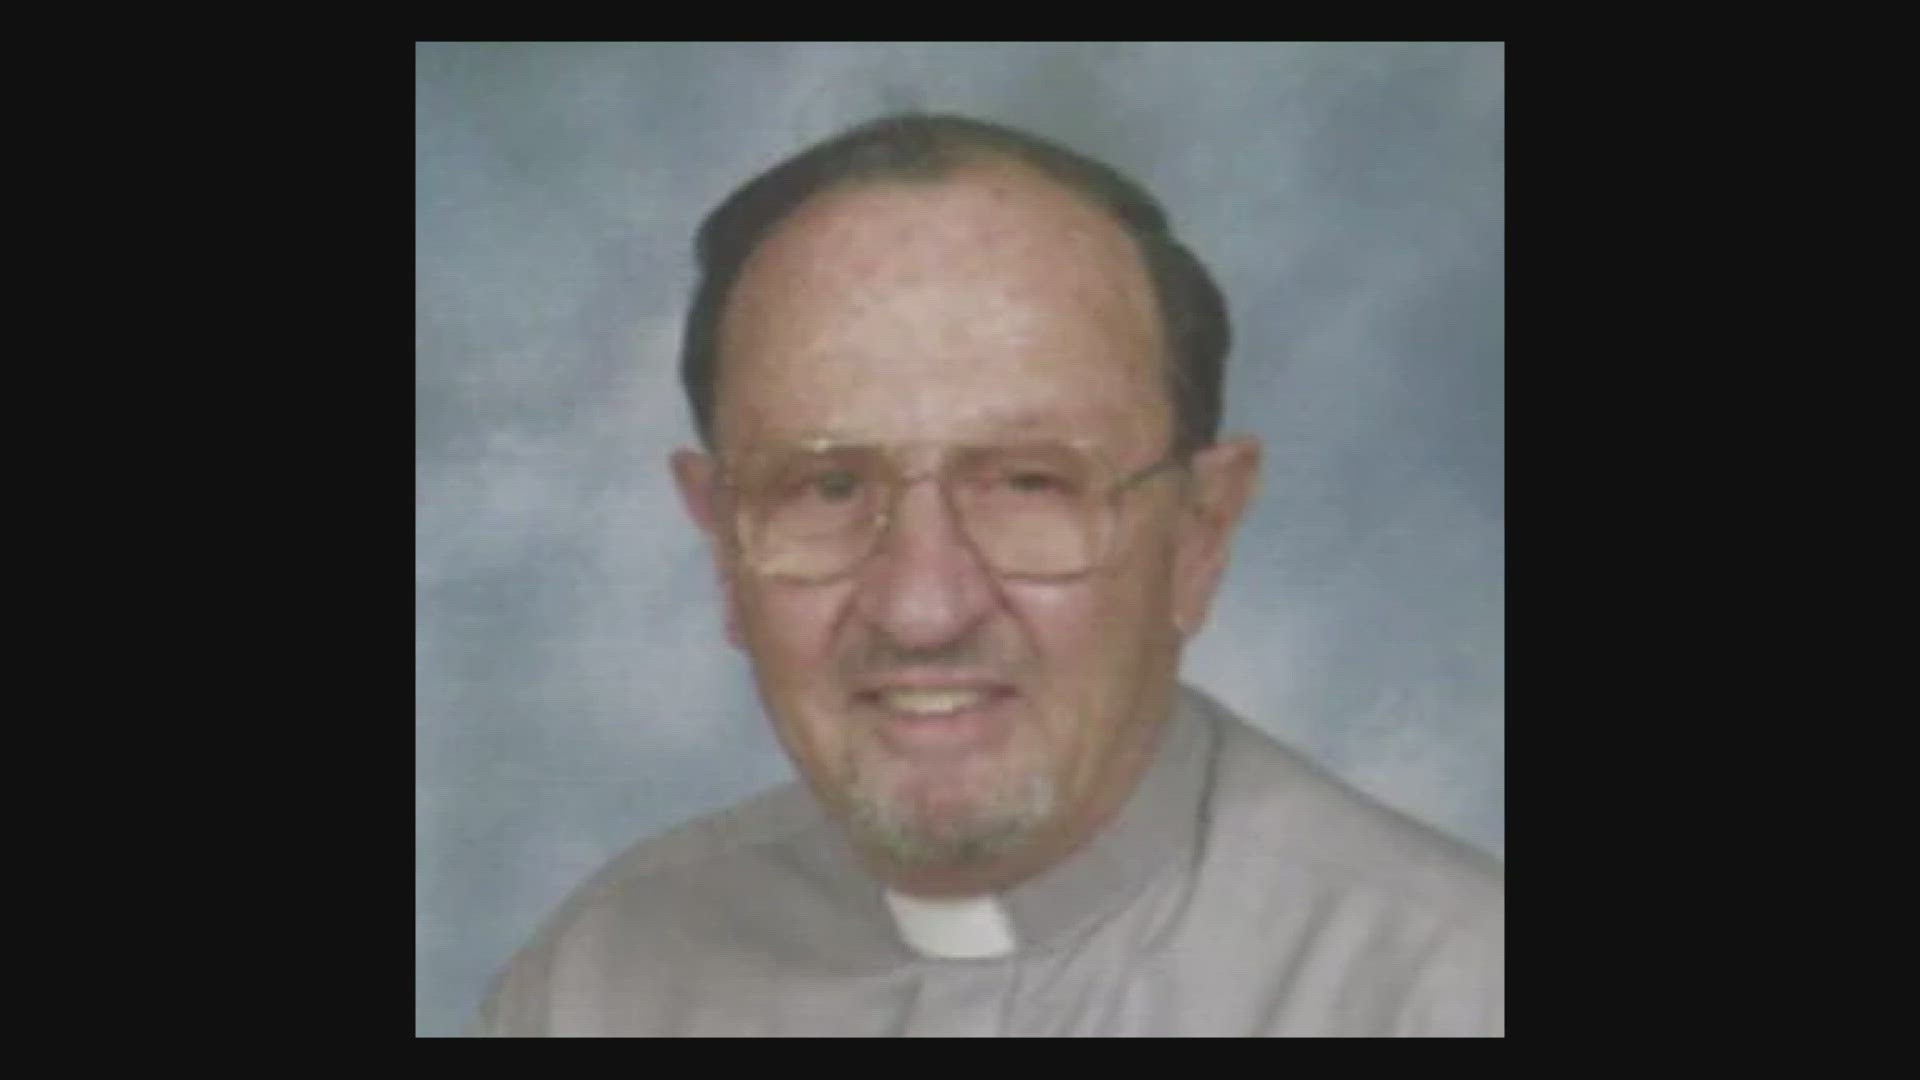 “Very shortly thereafter, my client reported this to the school,” the alleged victim’s attorney said. But retired priest Lawrence Hecker faced no consequences.